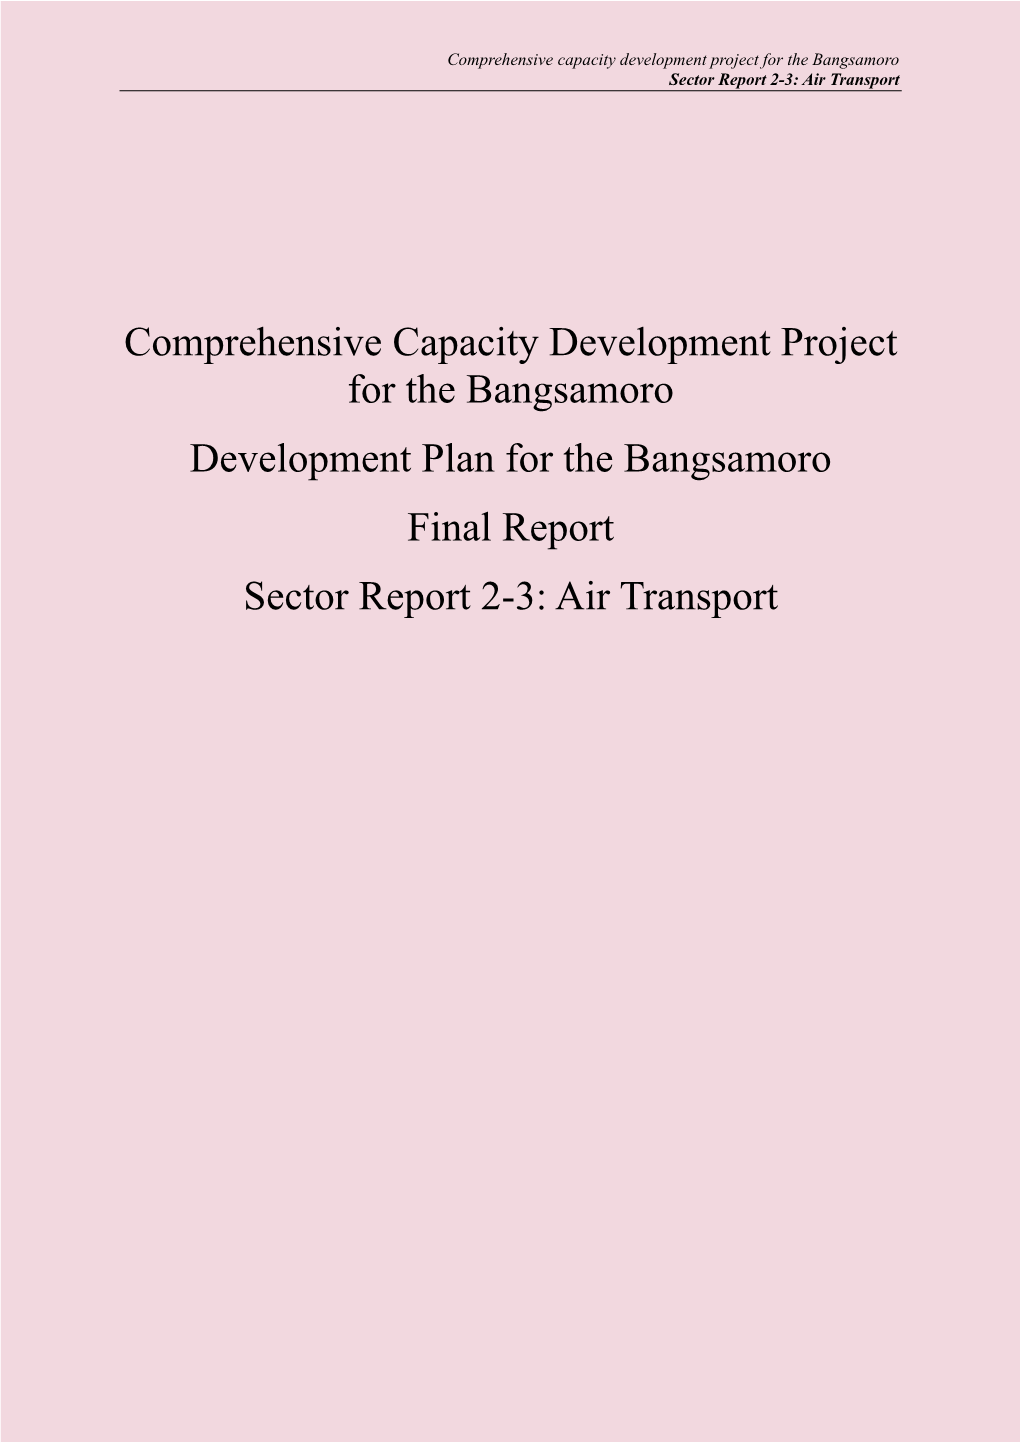 Comprehensive Capacity Development Project for the Bangsamoro Sector Report 2-3: Air Transport